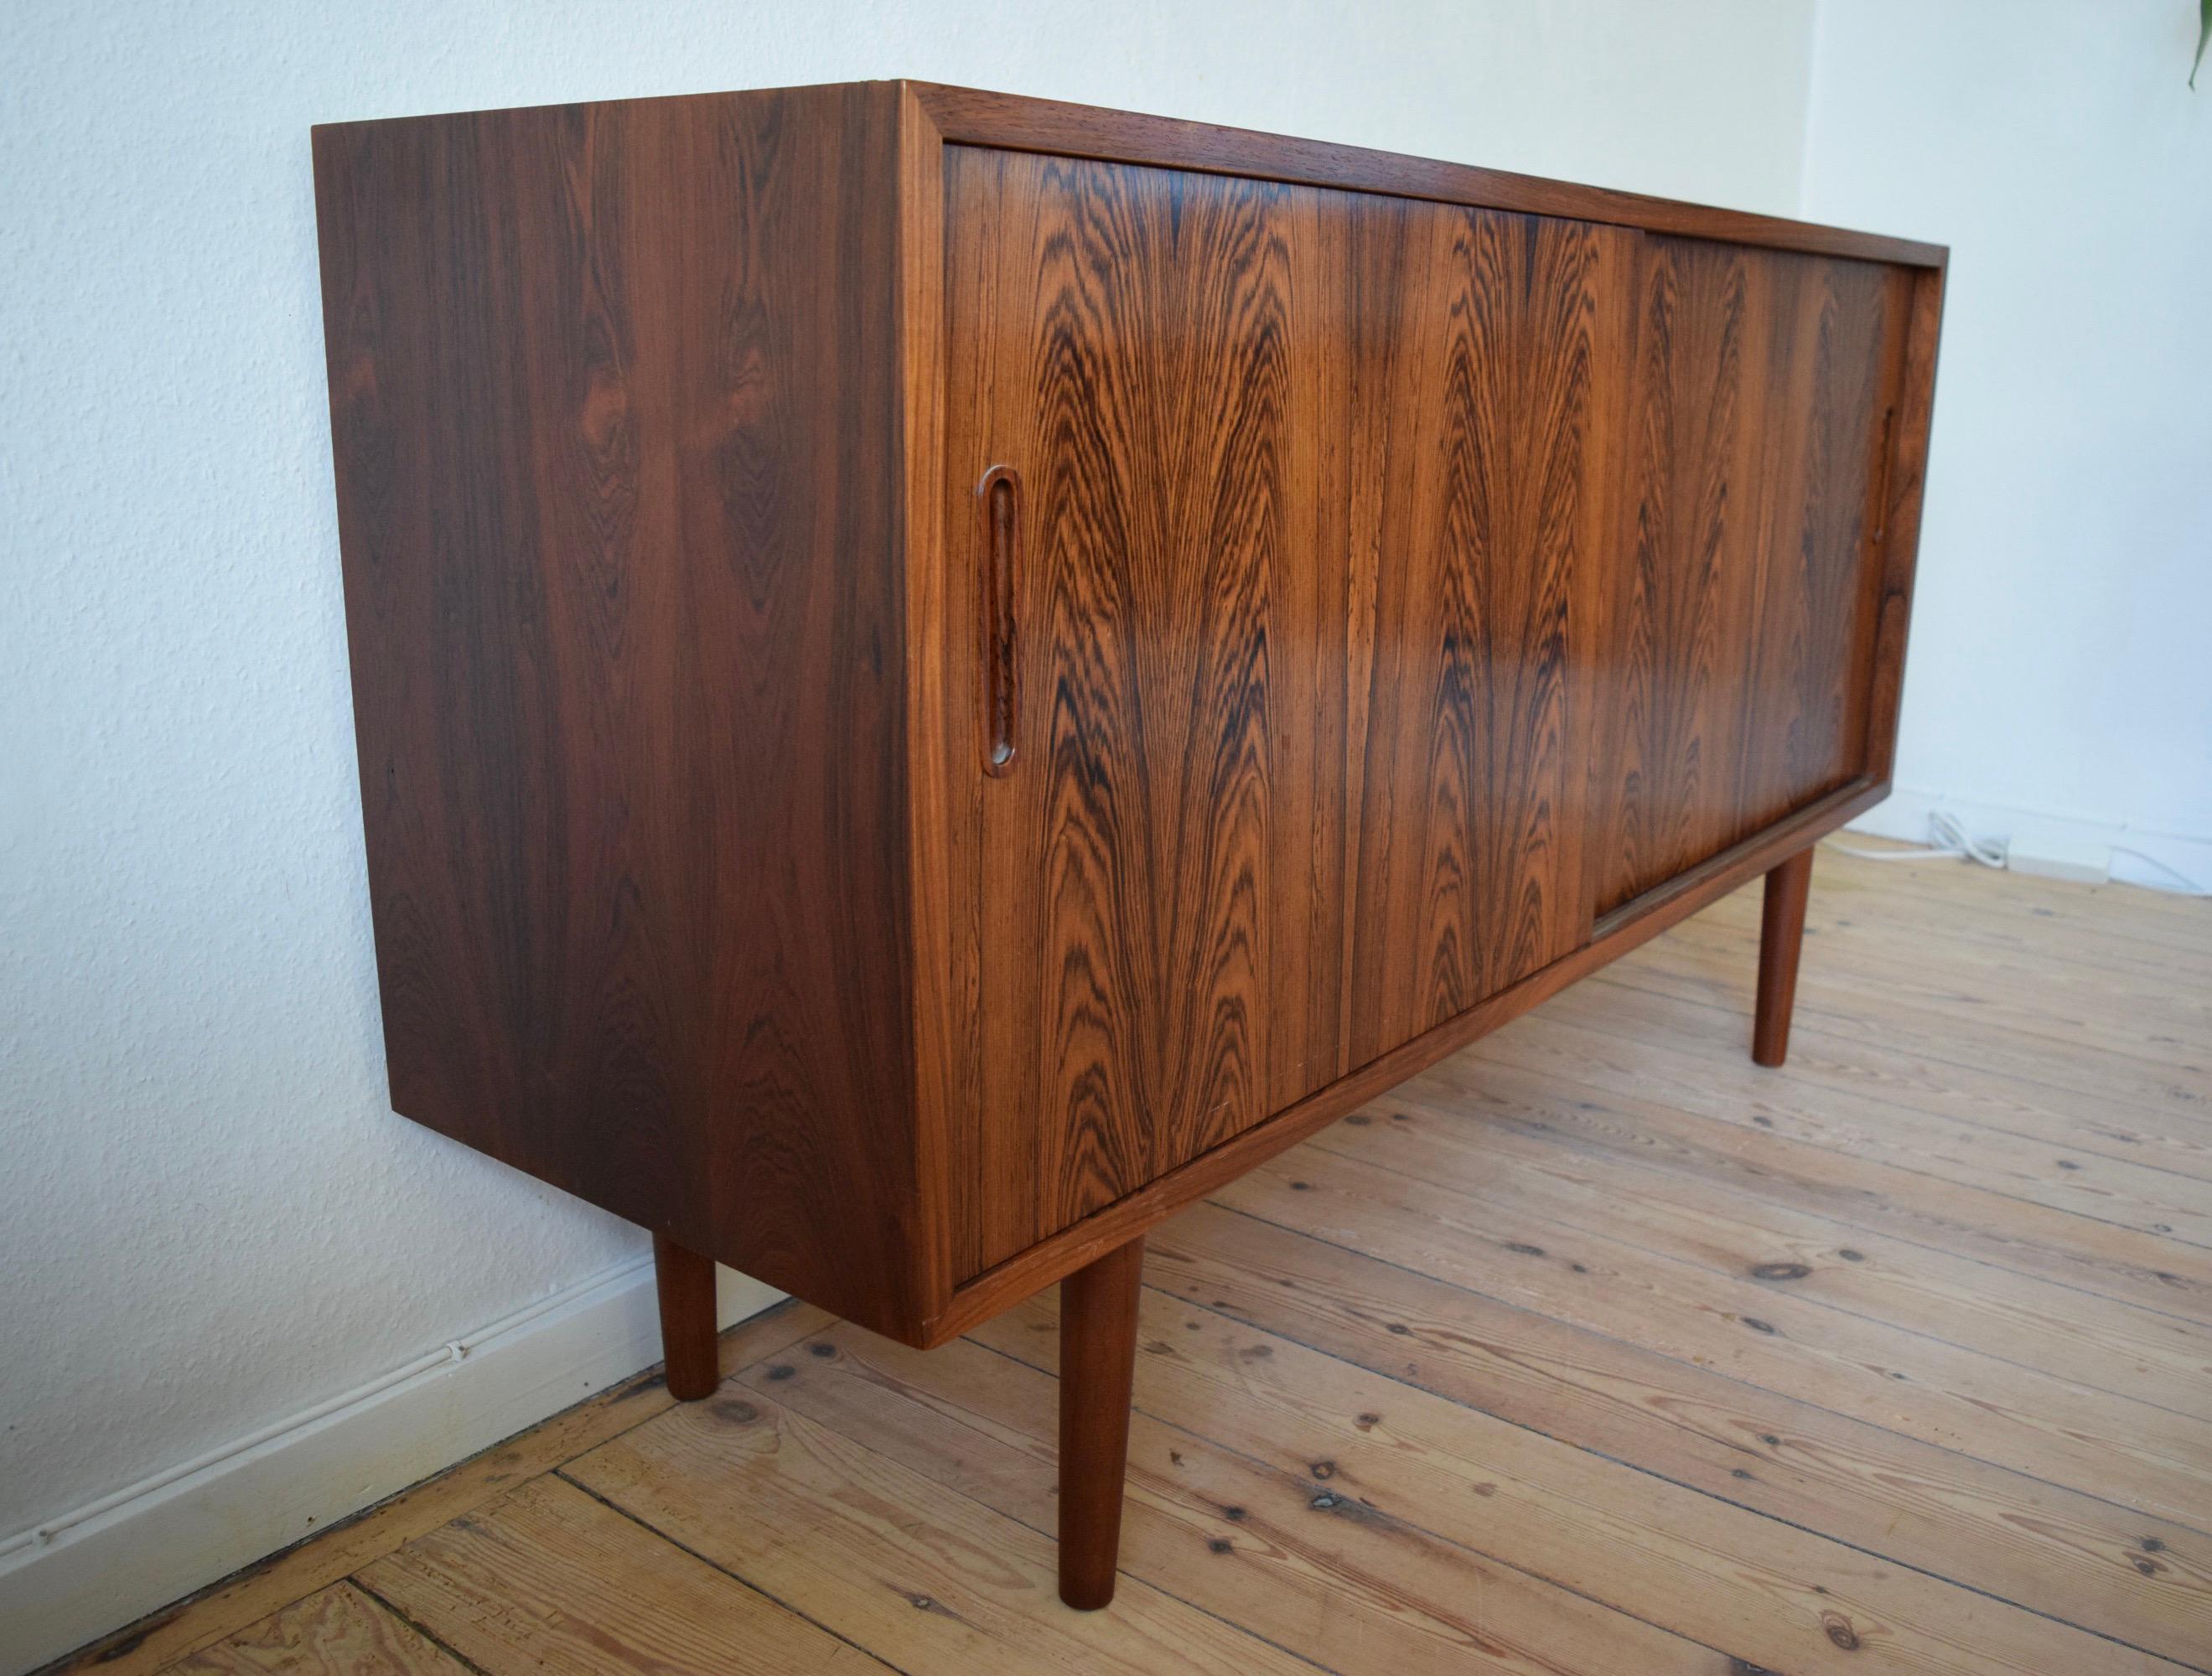 Mid-20th Century Danish Midcentury Rosewood Sideboard by Poul Hundevad, 1960s For Sale